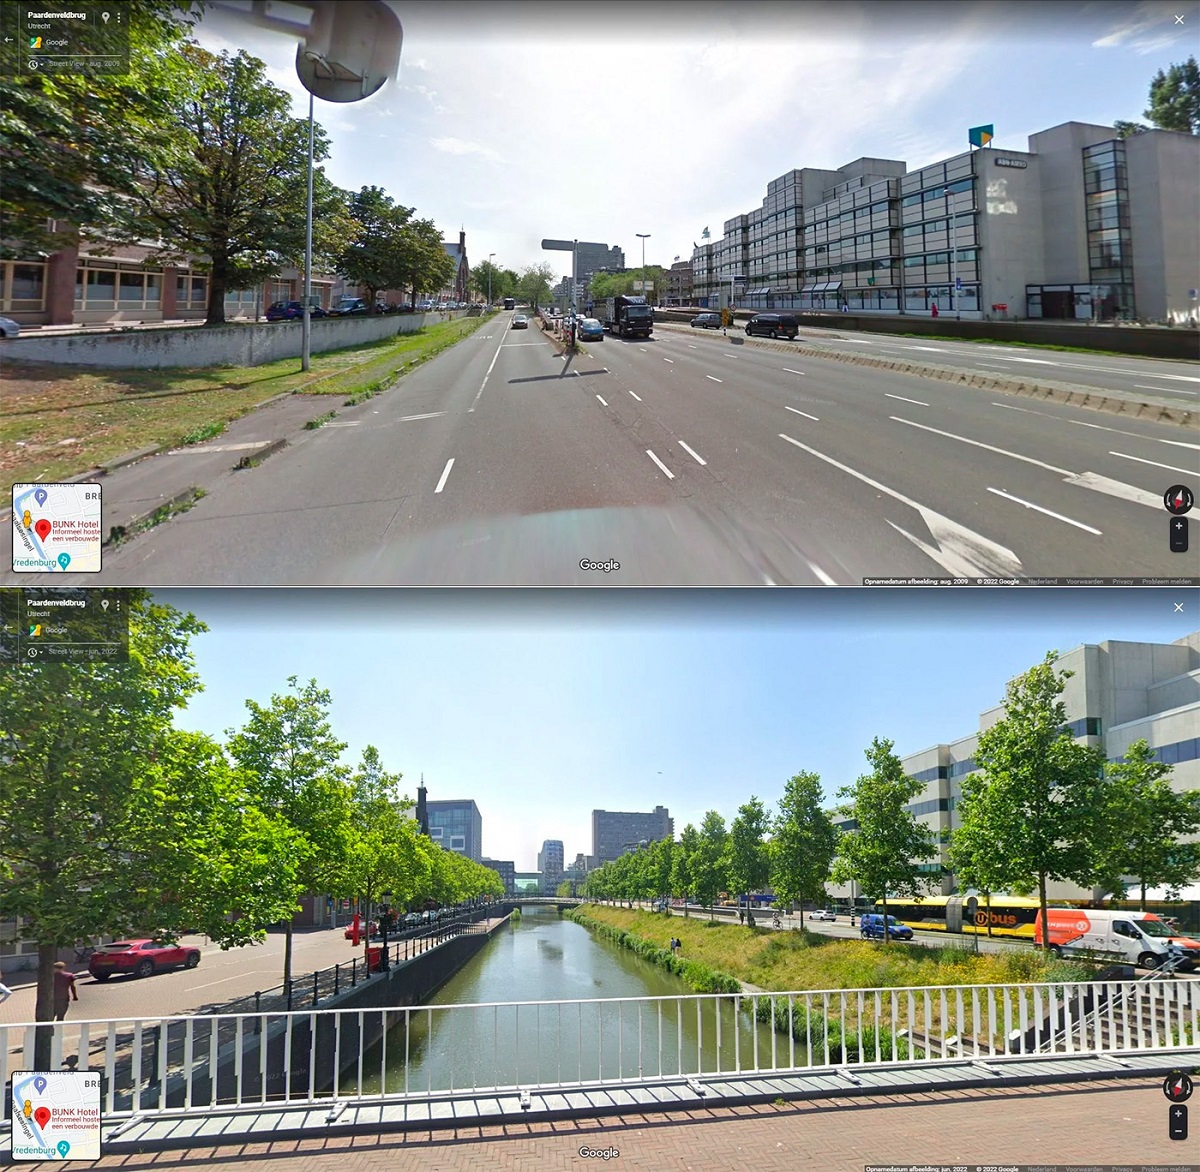 Utrecht, The Netherlands: 50 Years Ago, This Canal Was Filled And Converted Into A Highway. Now It Has Finally Been Transformed Back, With Space For Cyclists And Nature As Well